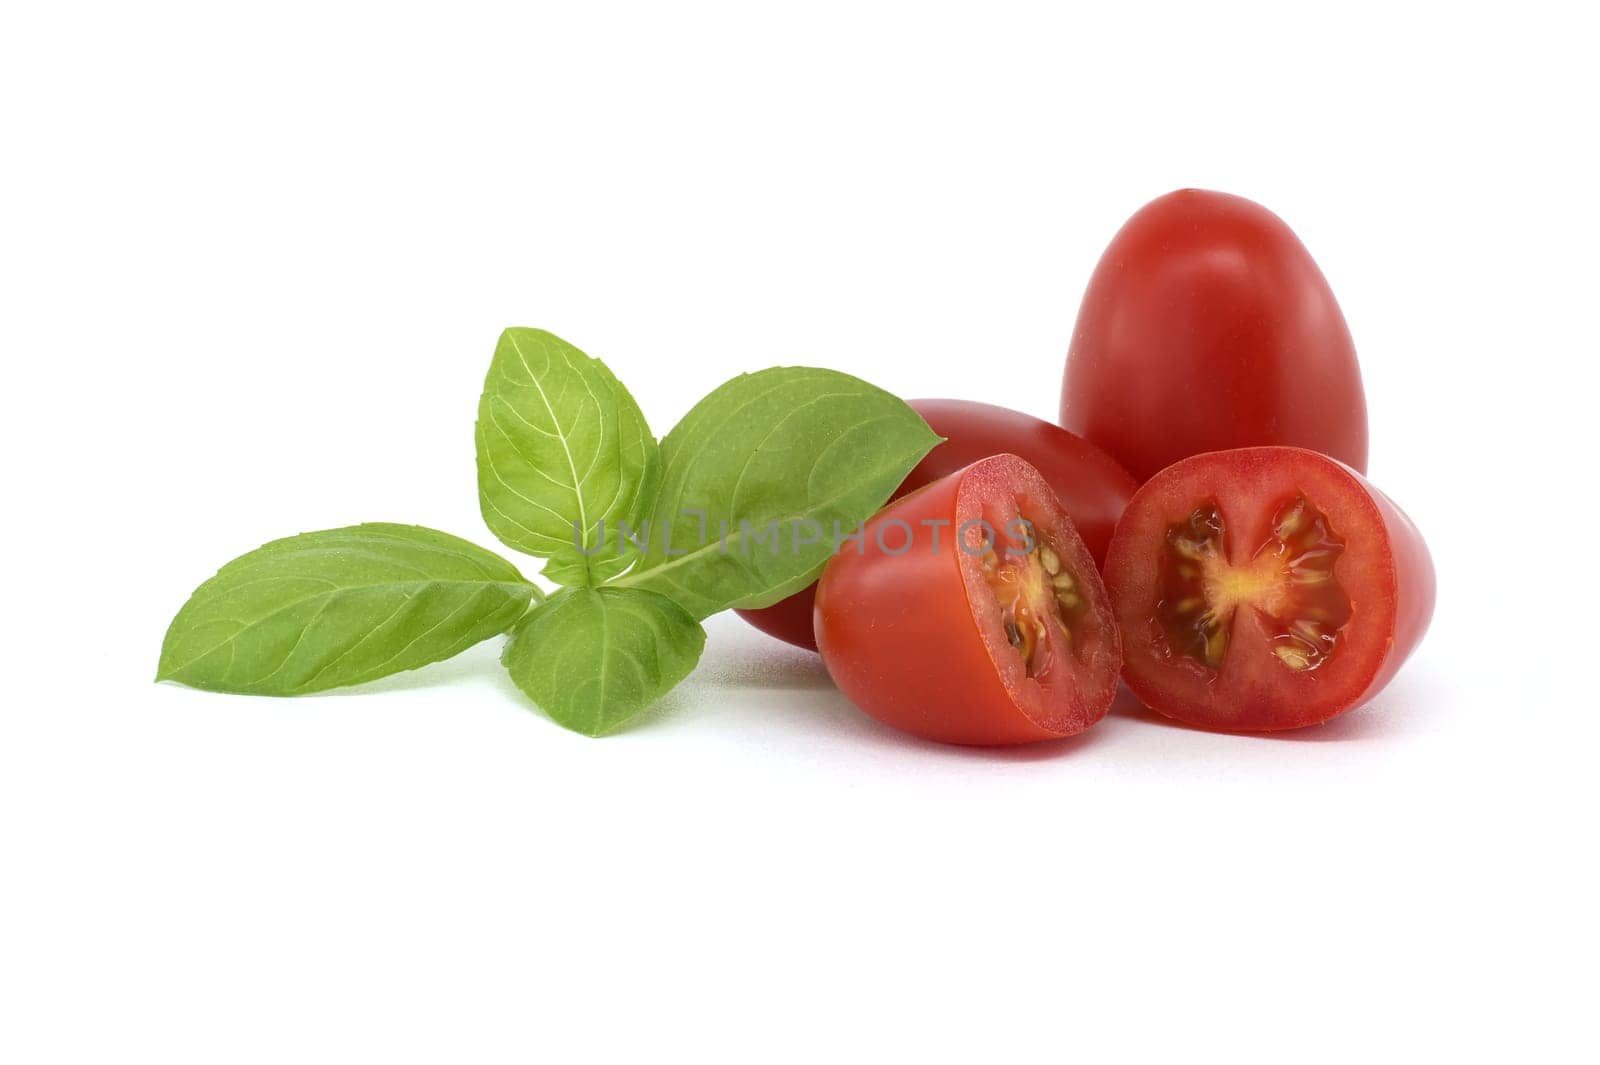 Close-up of fresh Roma tomatoes, including halved ones, alongside basil leaves on a white background. Perfect for illustrating healthy eating and fresh ingredients.